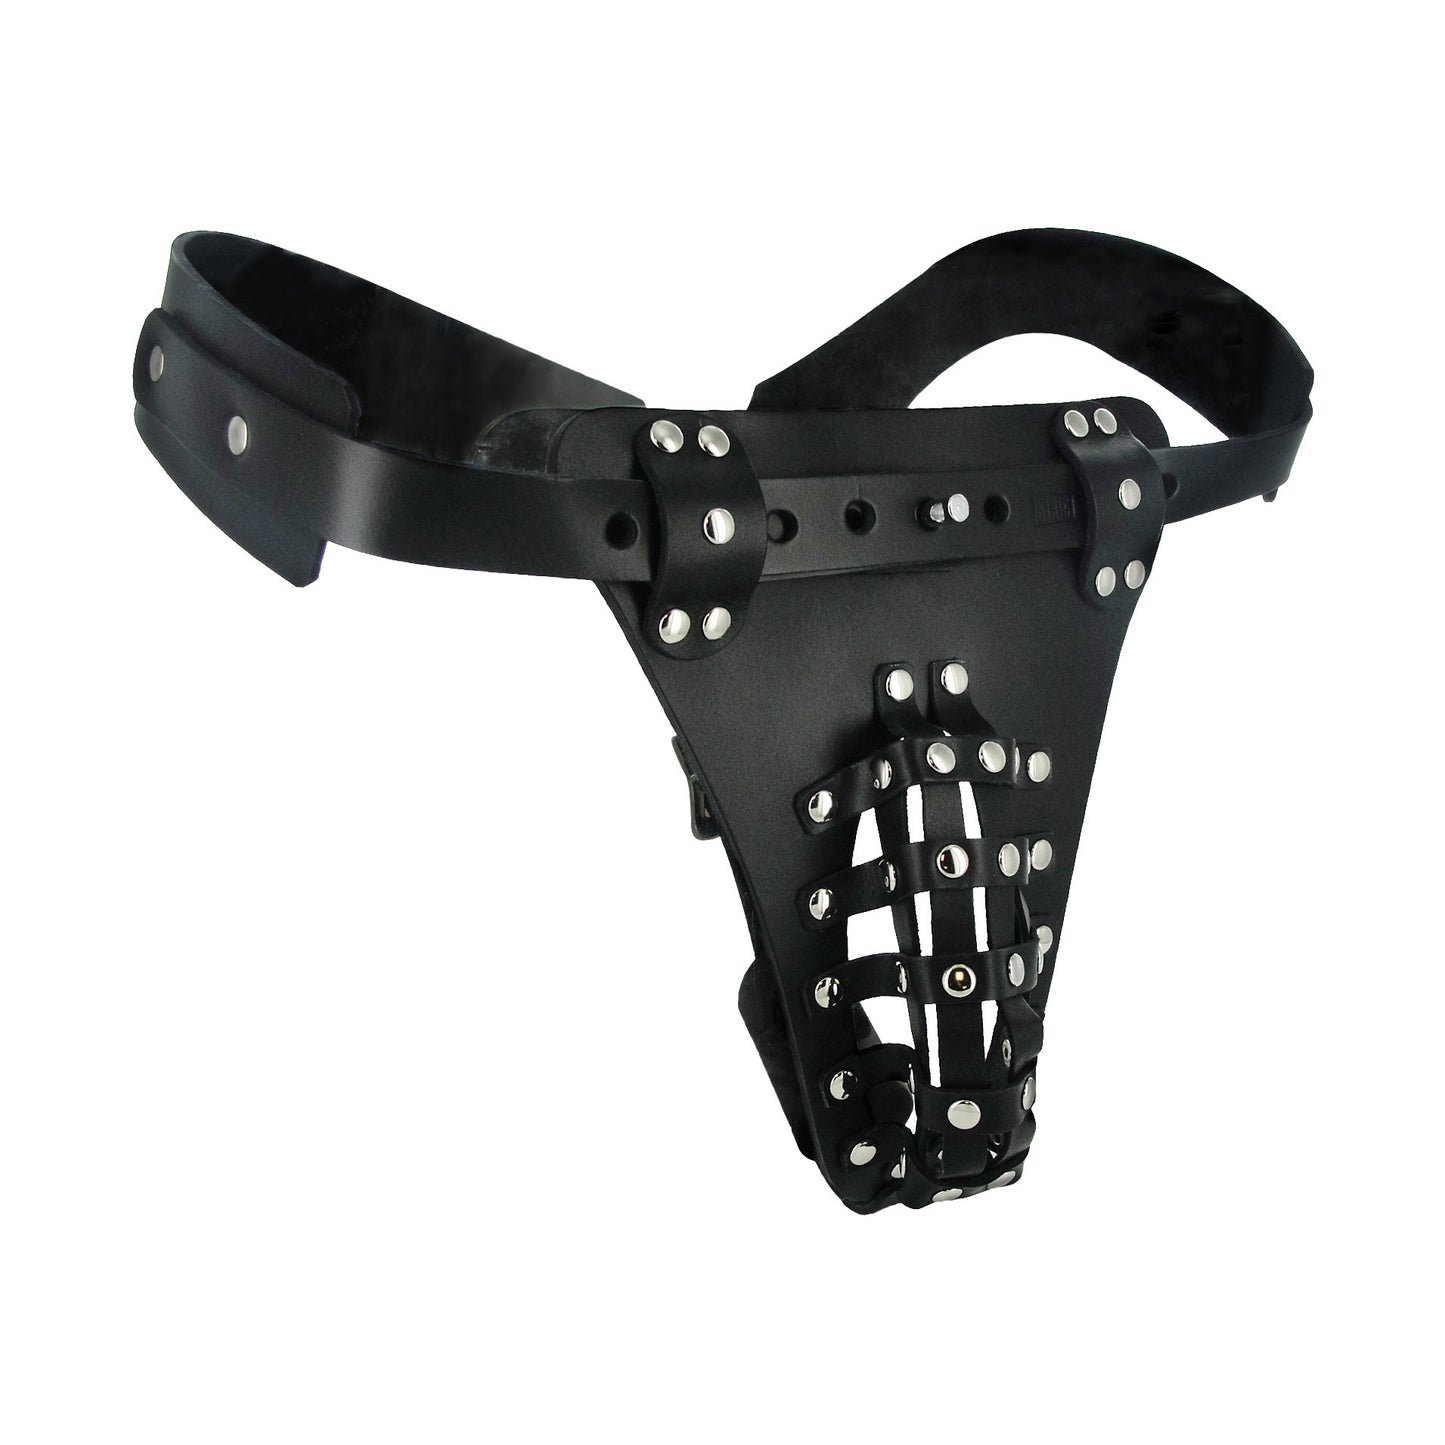 The Safety Net Leather Male Chastity Belt with Anal Plug Harness - UABDSM